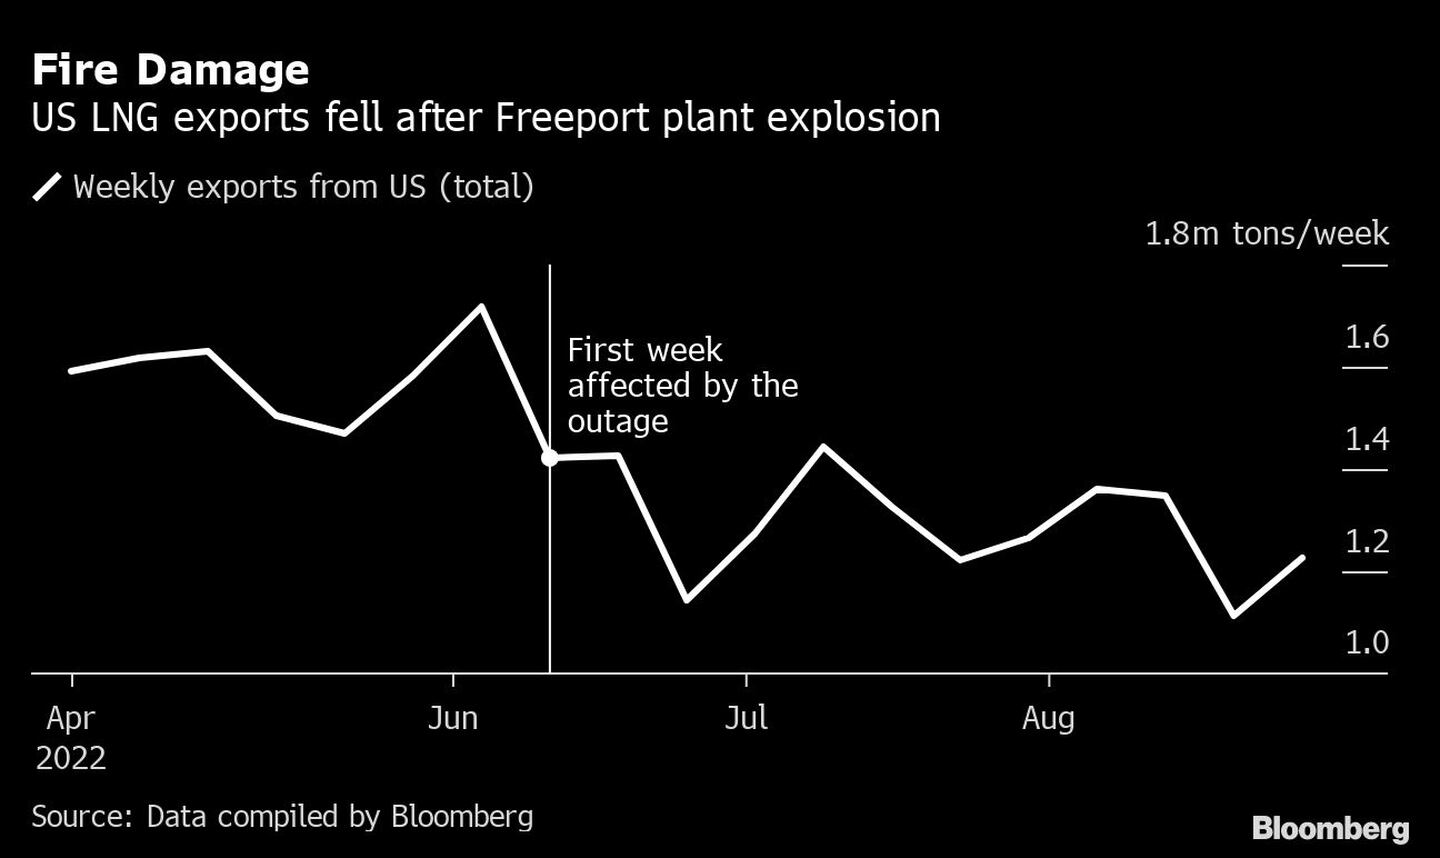 Fire Damage | US LNG exports fell after Freeport plant explosiondfd